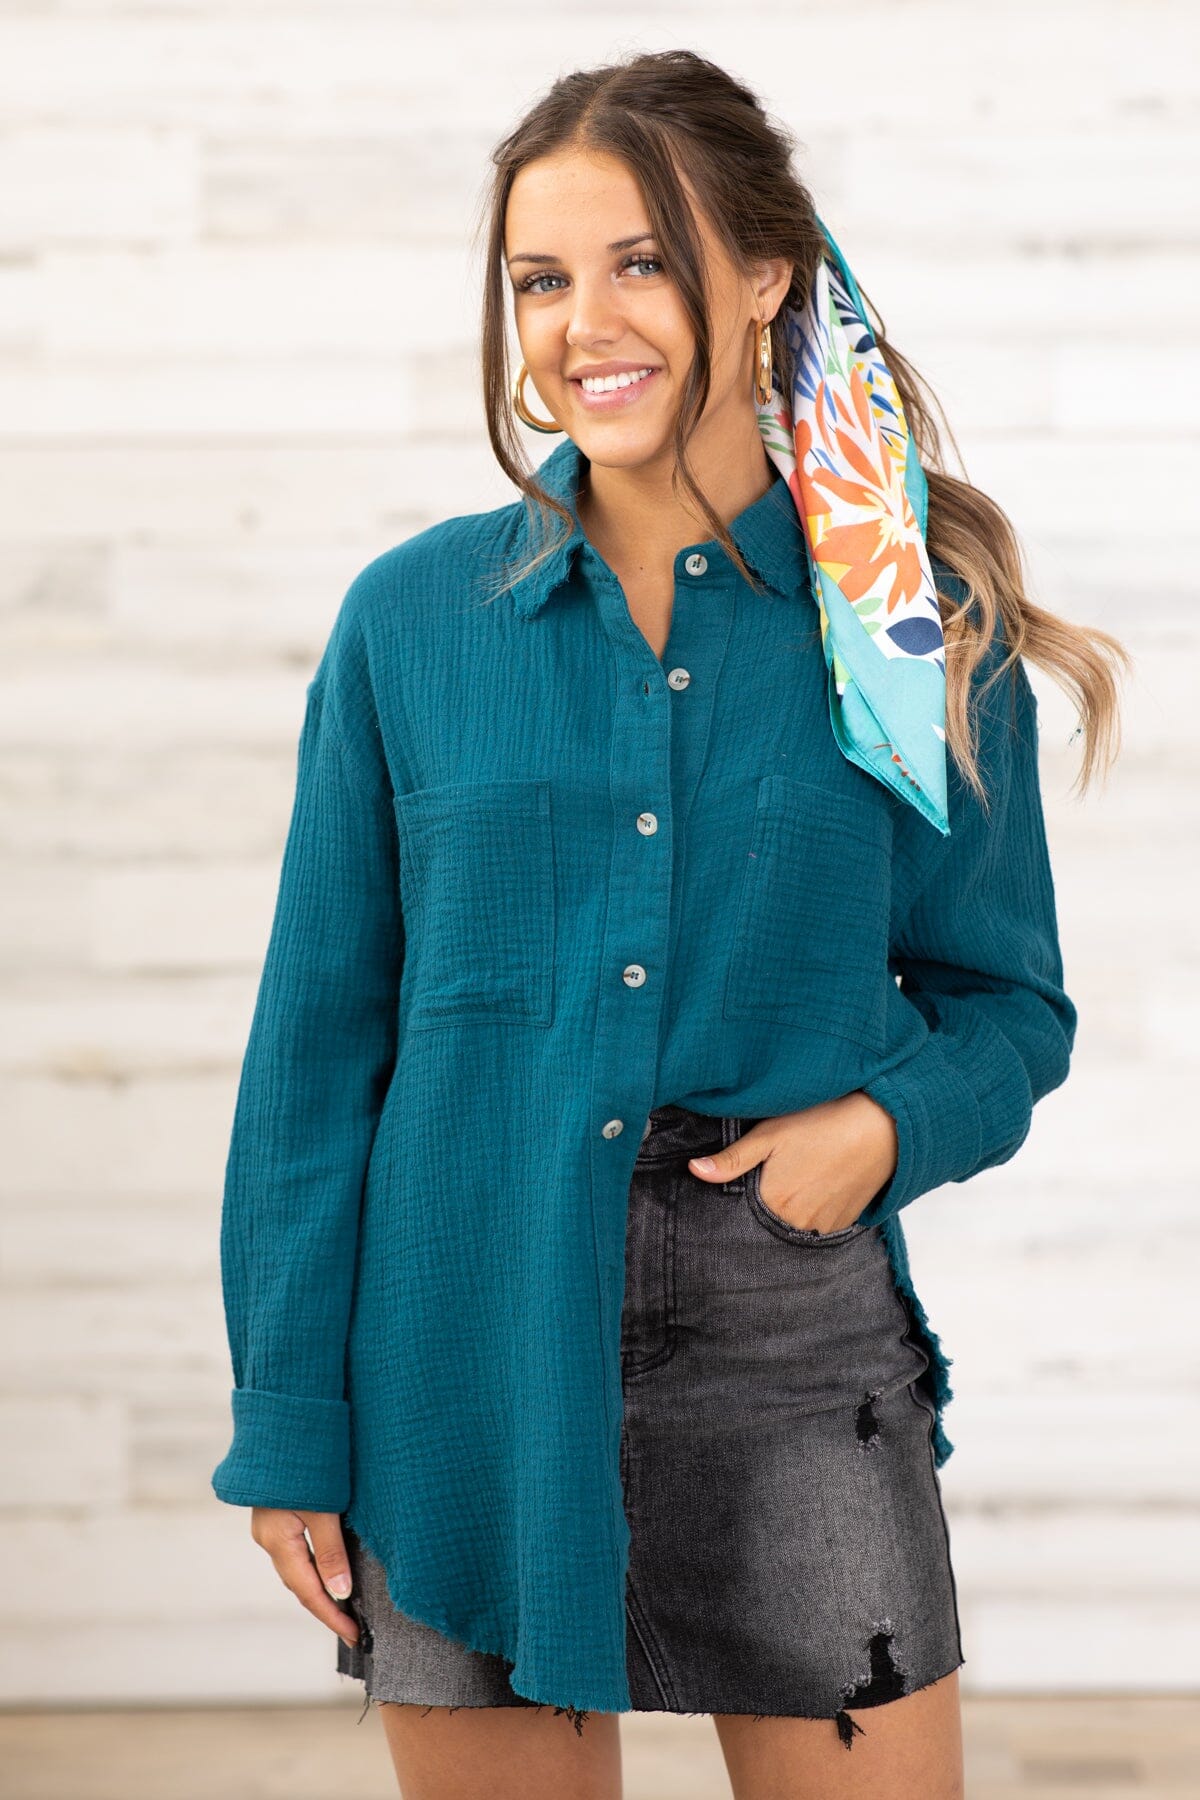 Teal Textured Button Up Top With Pocket - Filly Flair